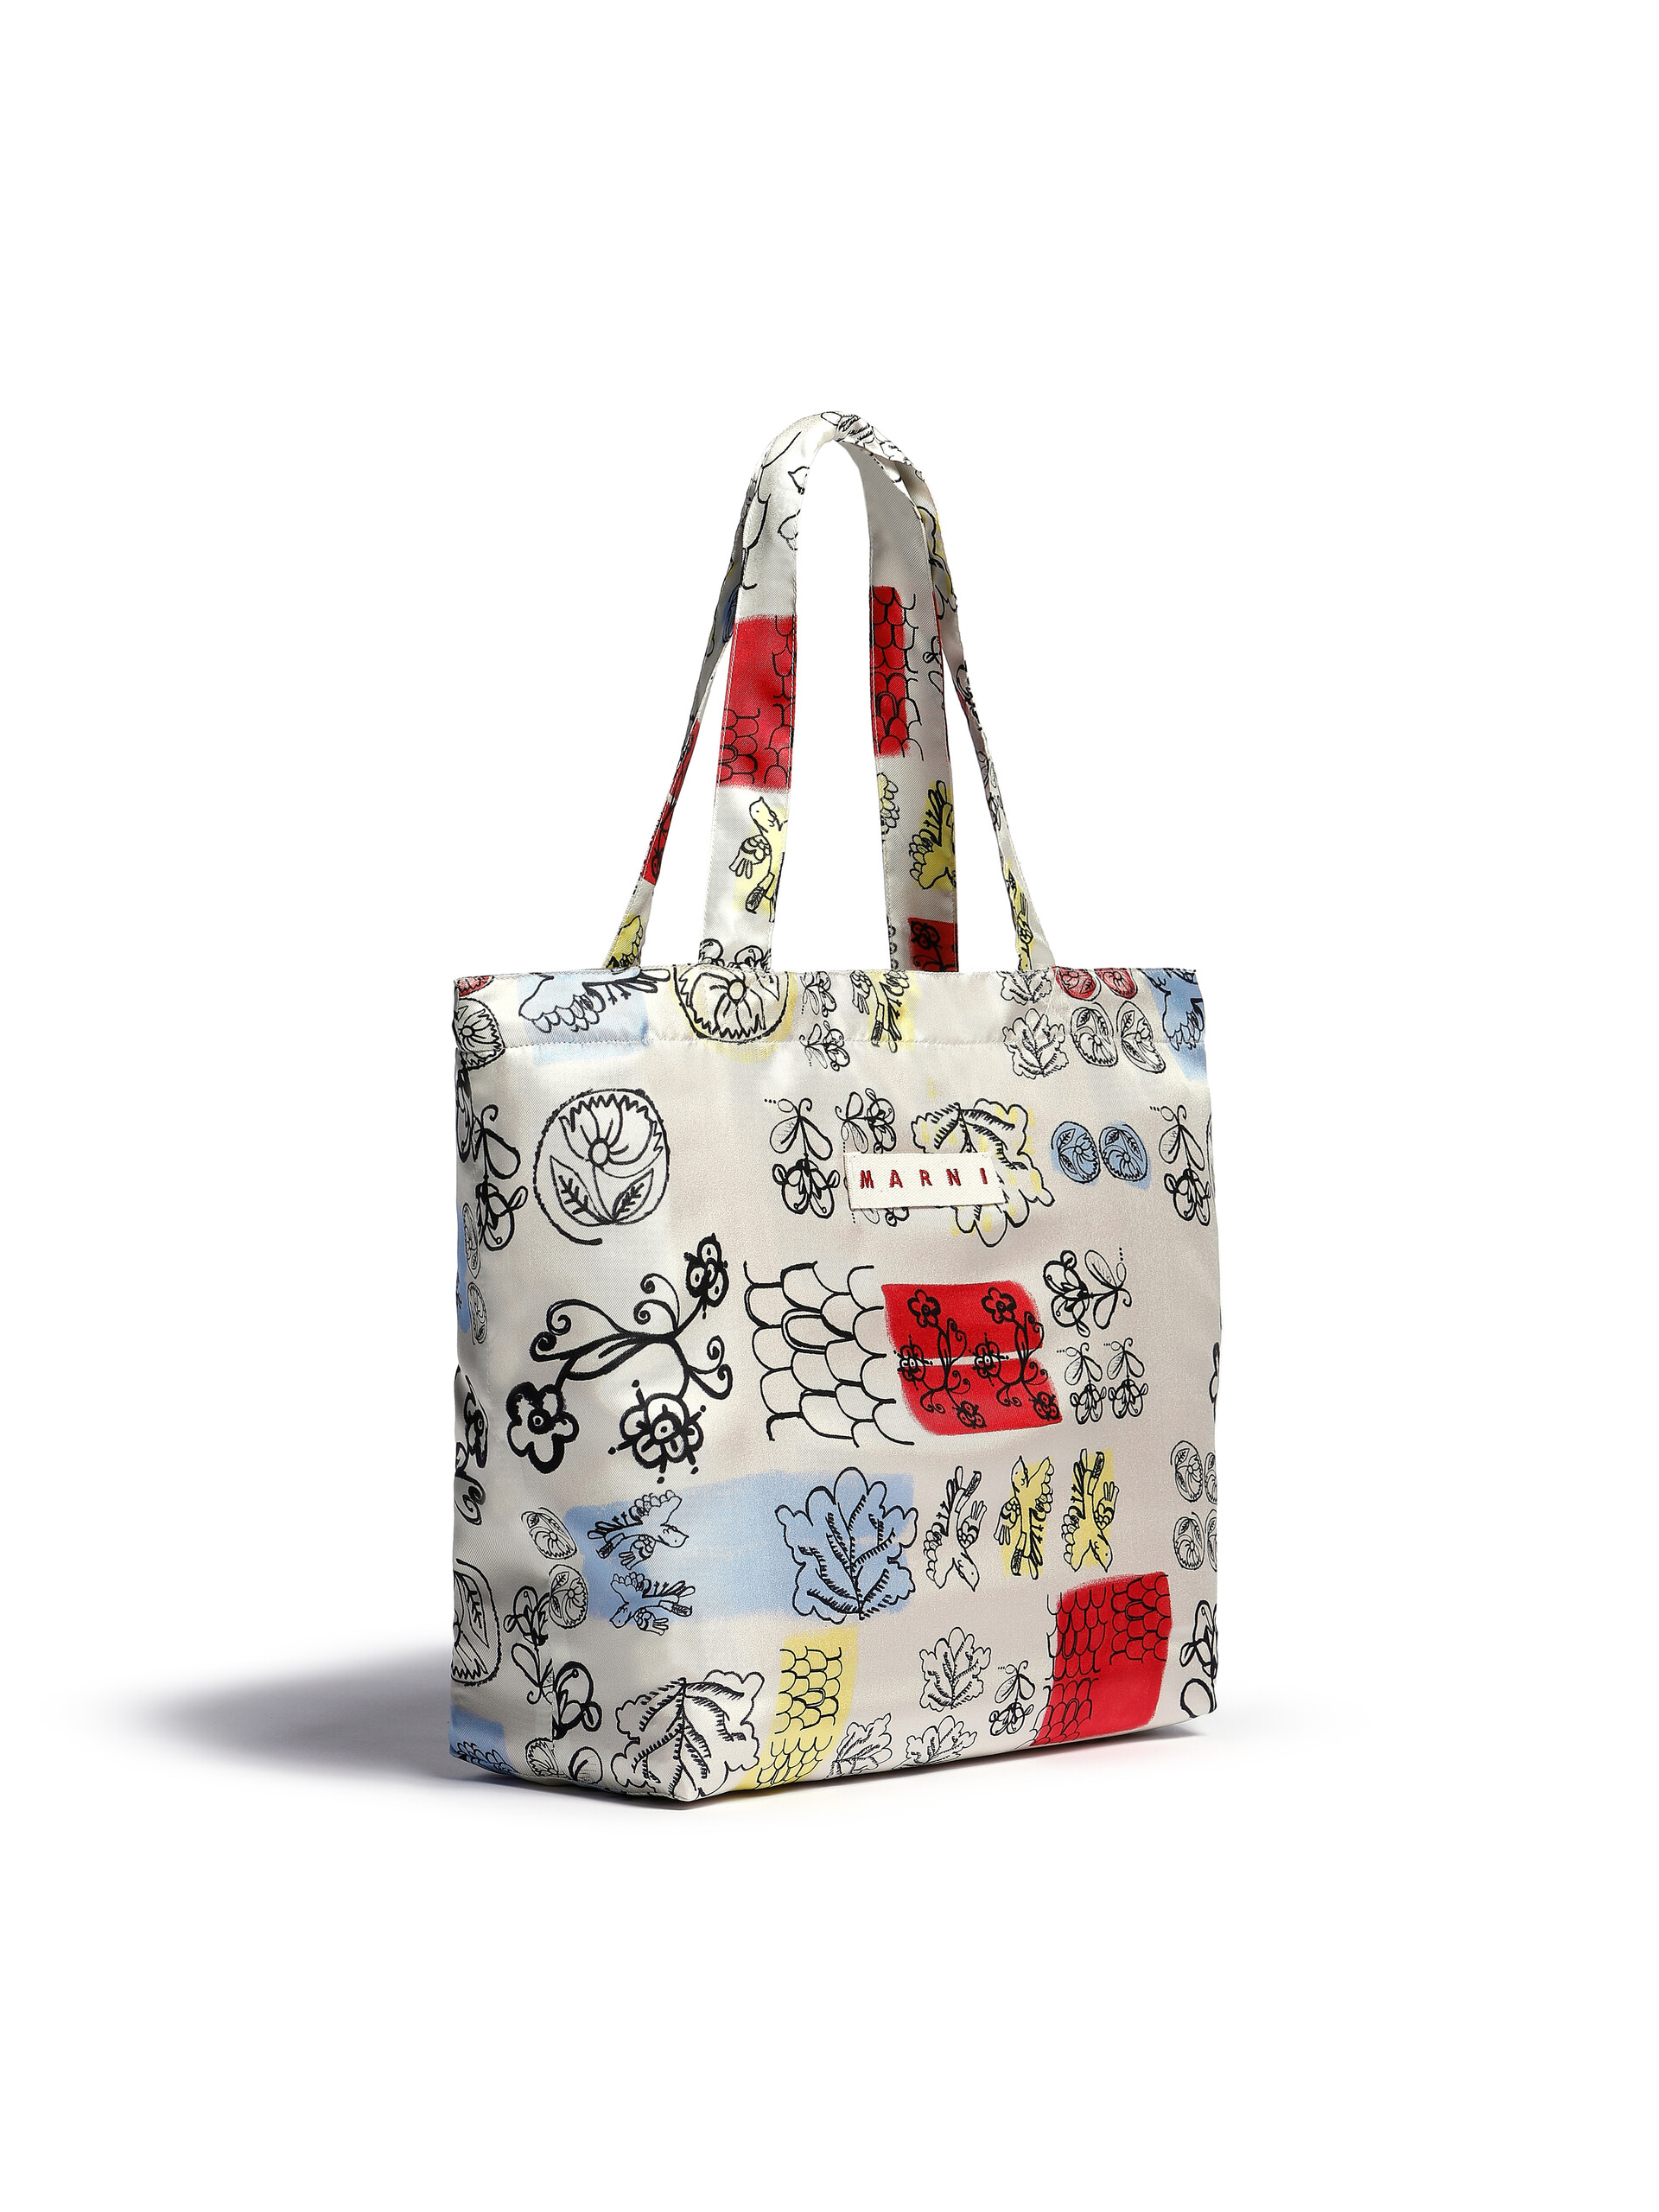 Ivory white silk tote bag with archival graphic print - Bags - Image 2